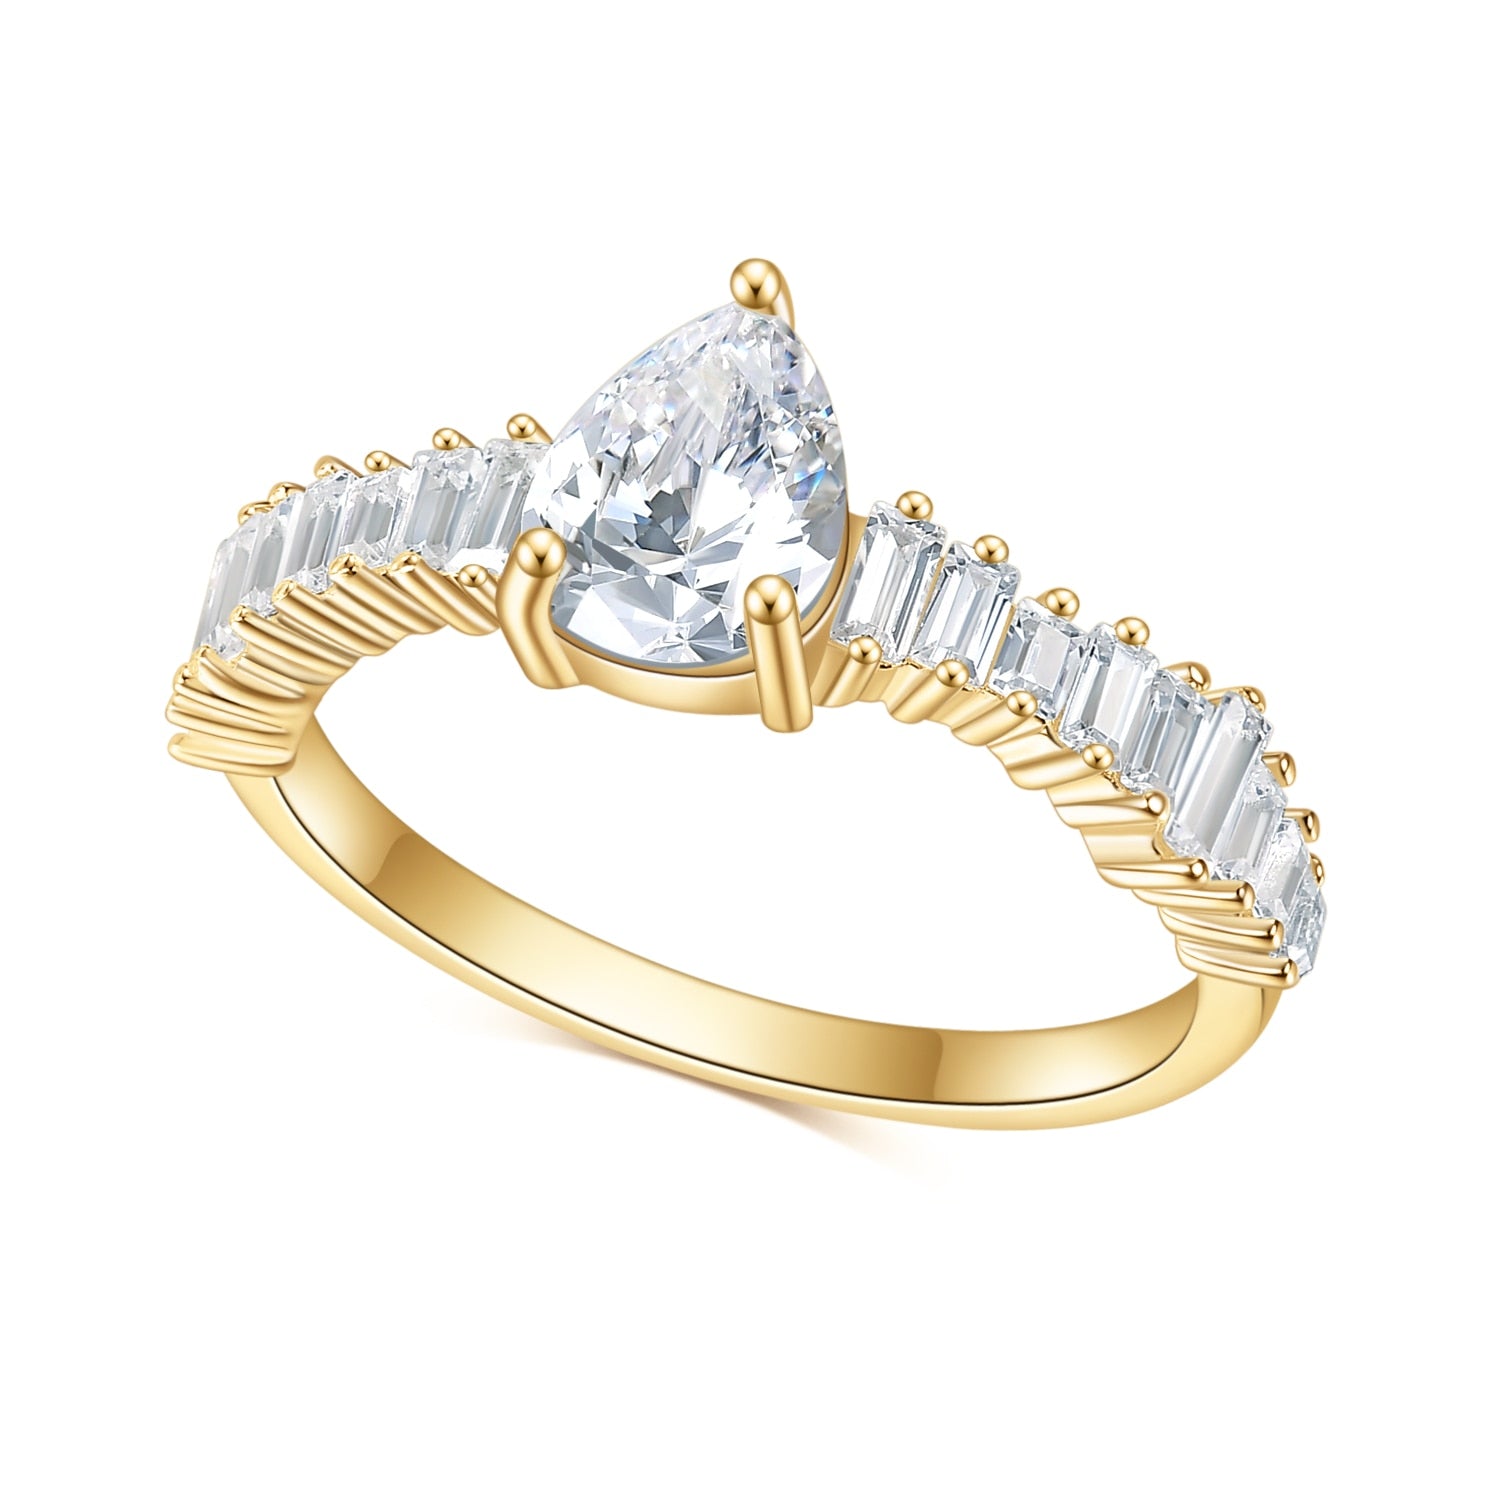 A gold ring with a tear drop shape moissanite on a band of varying side emerald cut gems set horizontally.